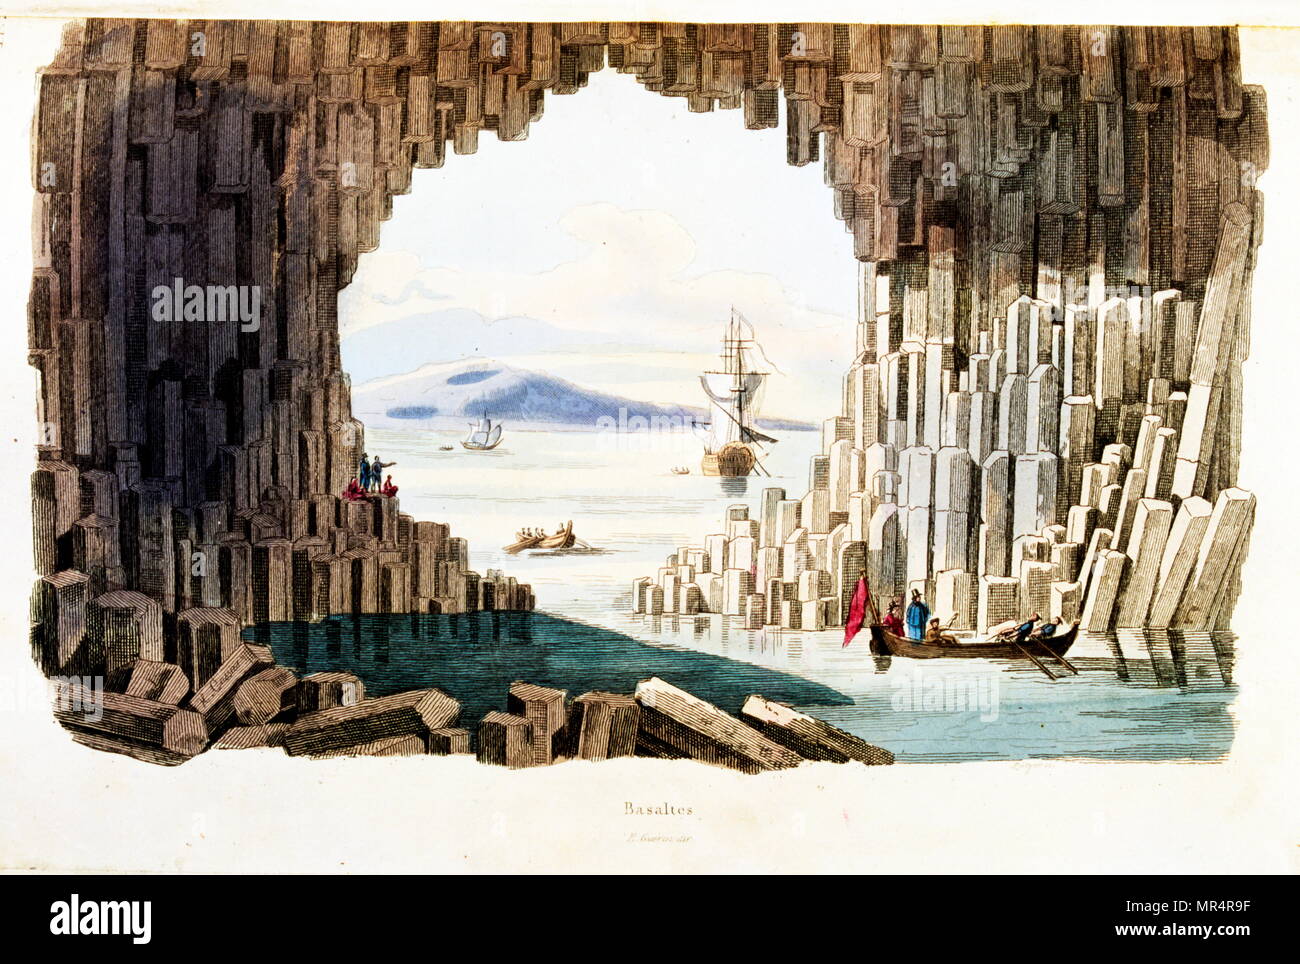 French, Coloured illustration, dated circa 1884, depicting The Giant's Causeway, interlocking basalt columns, in County Antrim, Northern Ireland Stock Photo